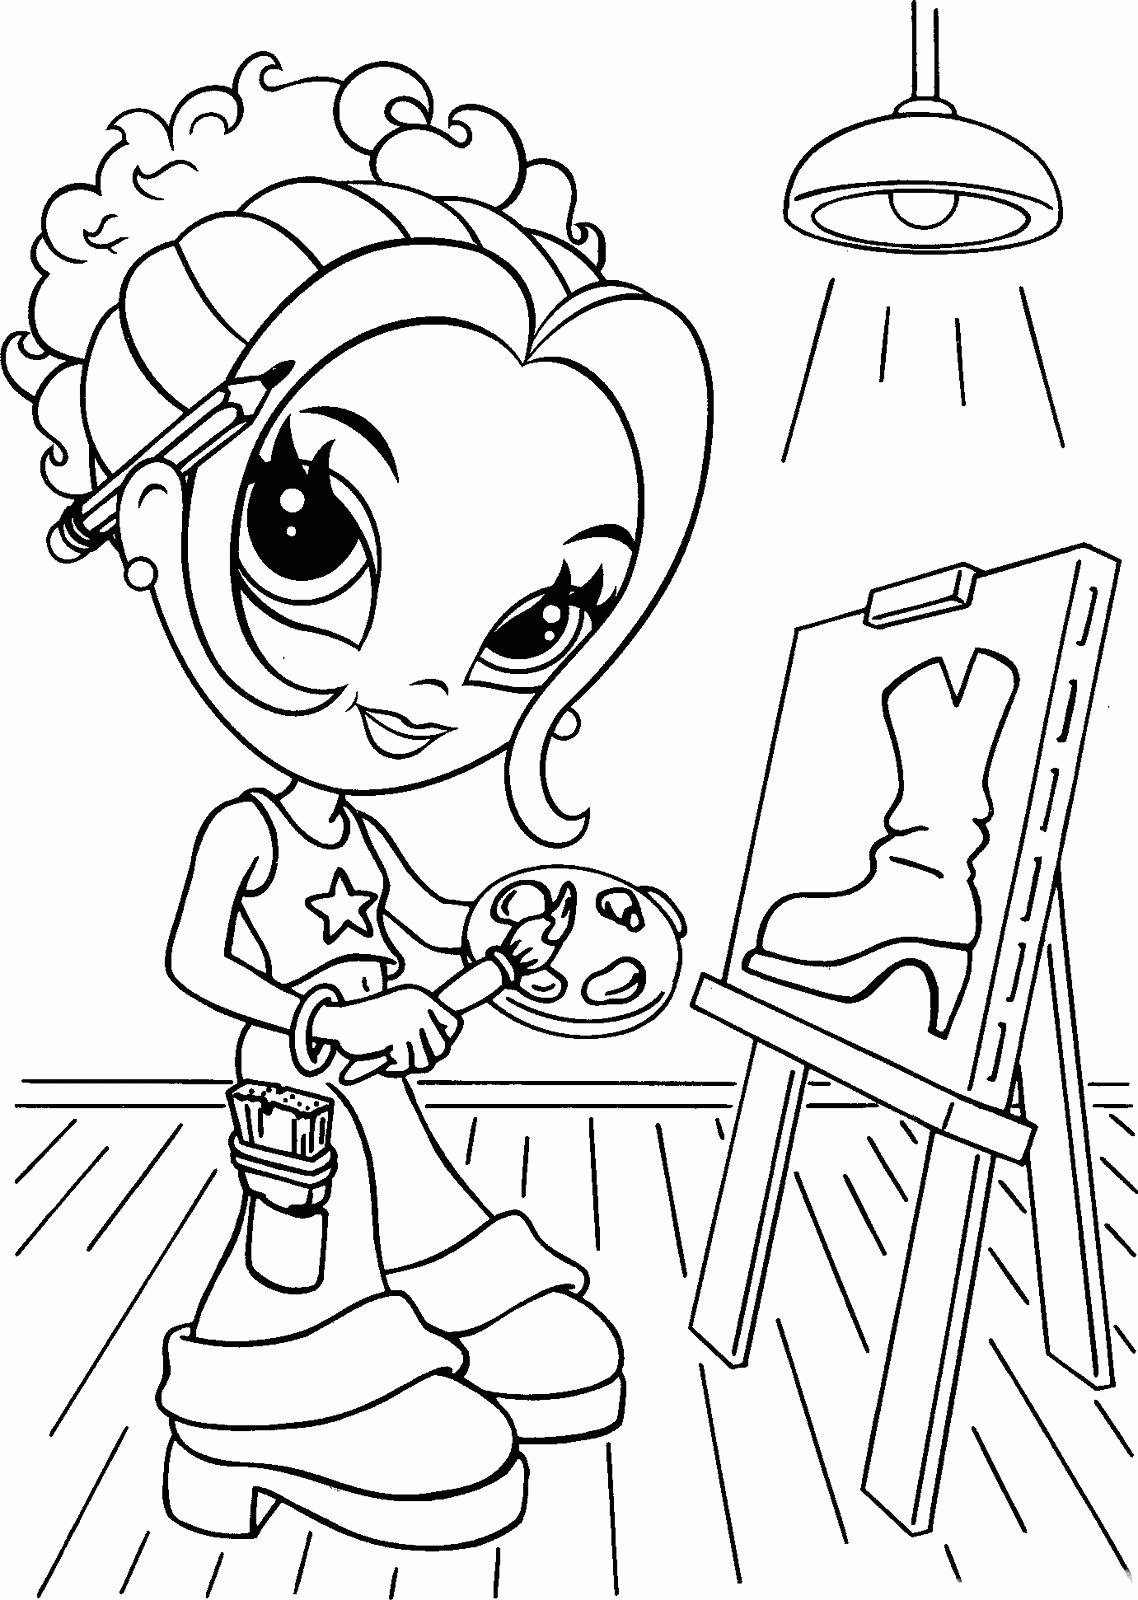 Printable Lisa Frank - Coloring Pages for Kids and for Adults